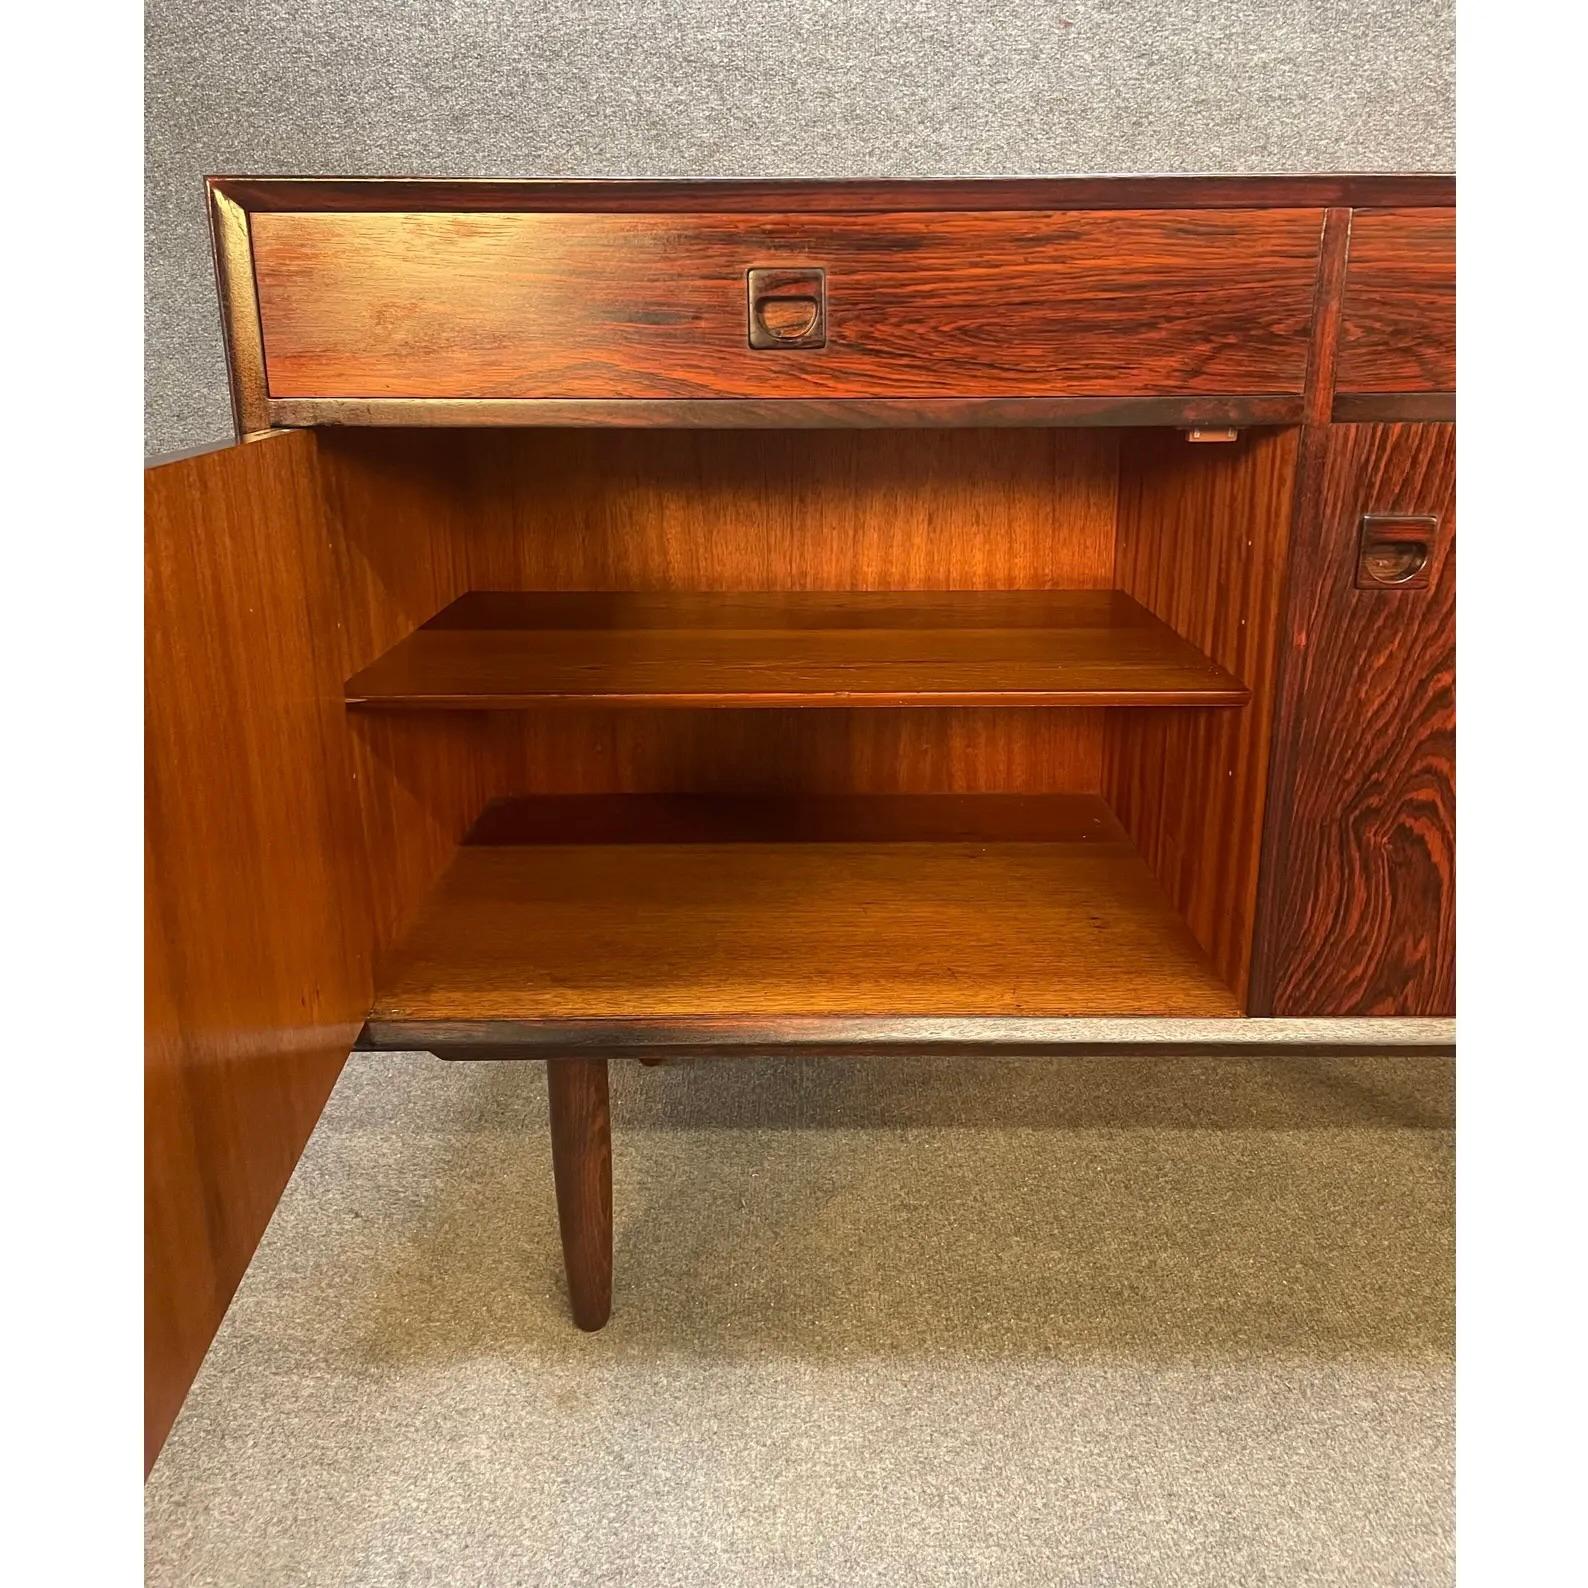 Here is a beautiful scandinavian modern rosewood compact sideboard manufactured by Brouer Mobelfabrik in Denmark in the 1960's. This exquisite piece, recently imported from Europe to California before its refinishing, features a vibrant wood grain,